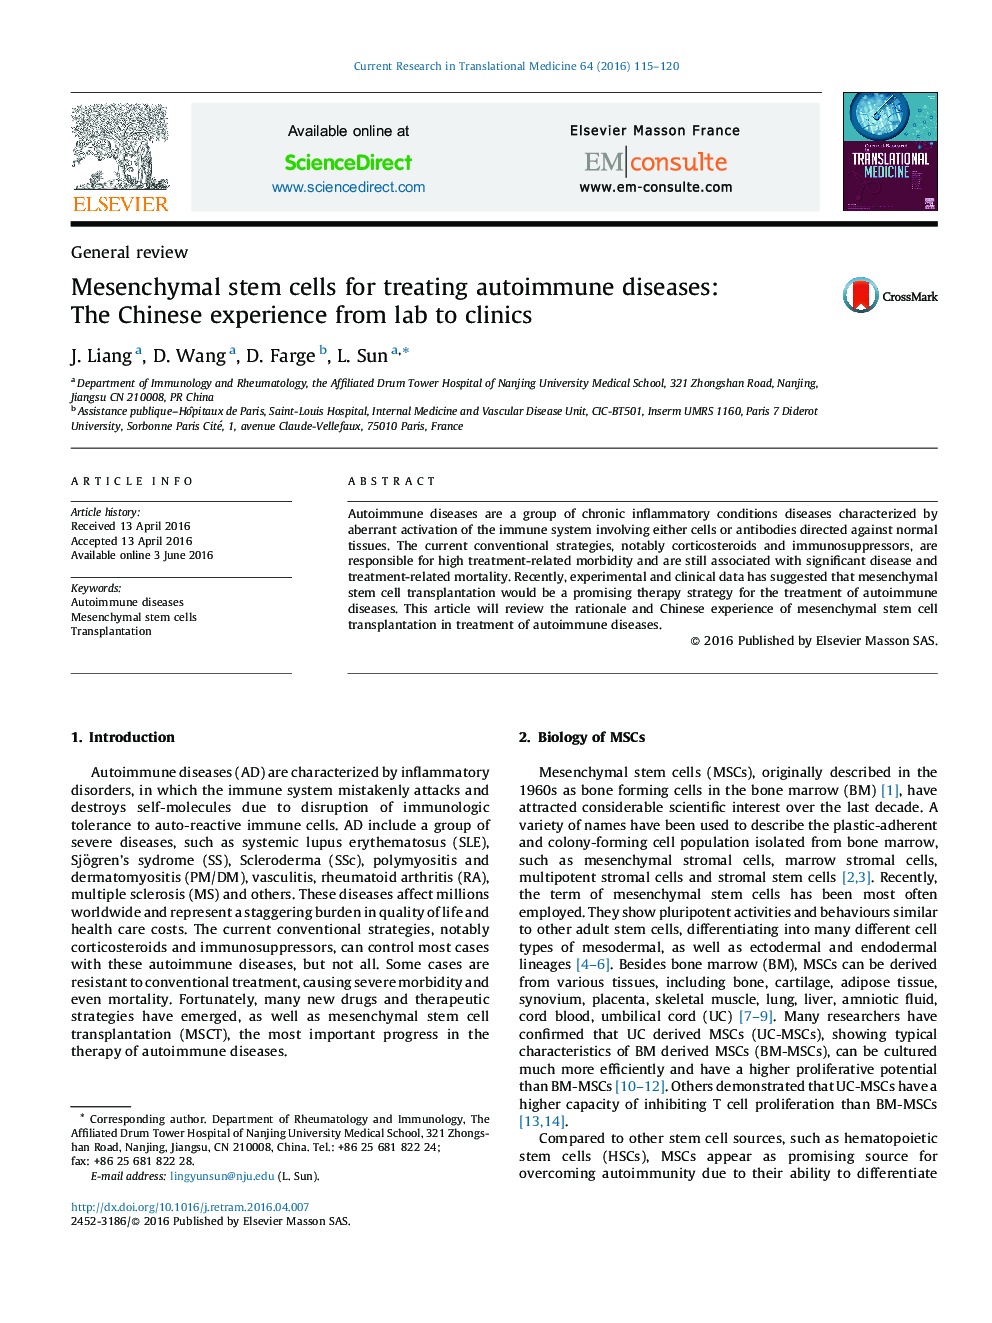 Mesenchymal stem cells for treating autoimmune diseases: The Chinese experience from lab to clinics